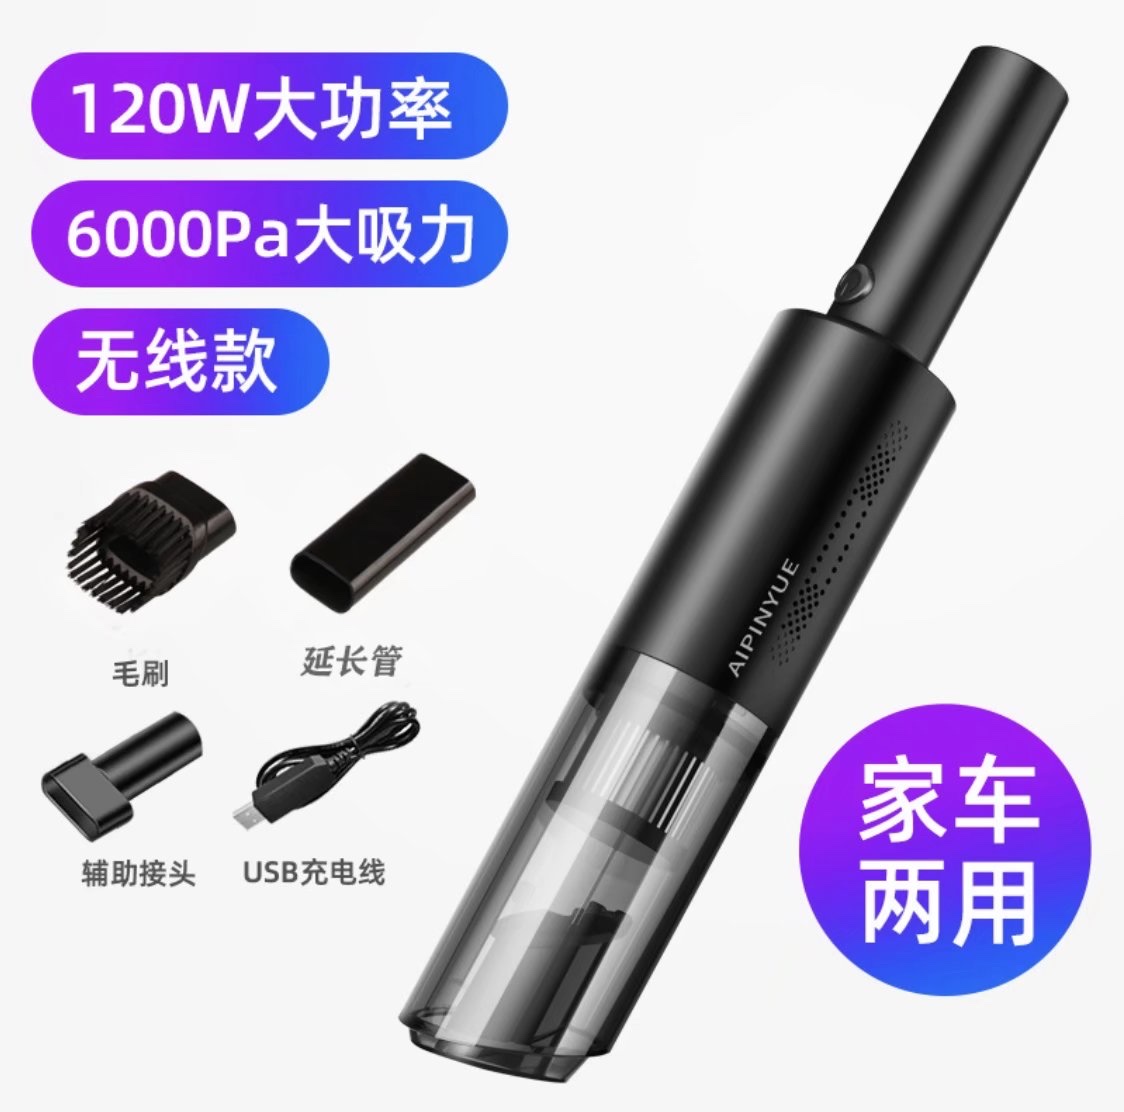 Portable wireless vacuum cleaner for home and car家车两用便携无线吸尘器图